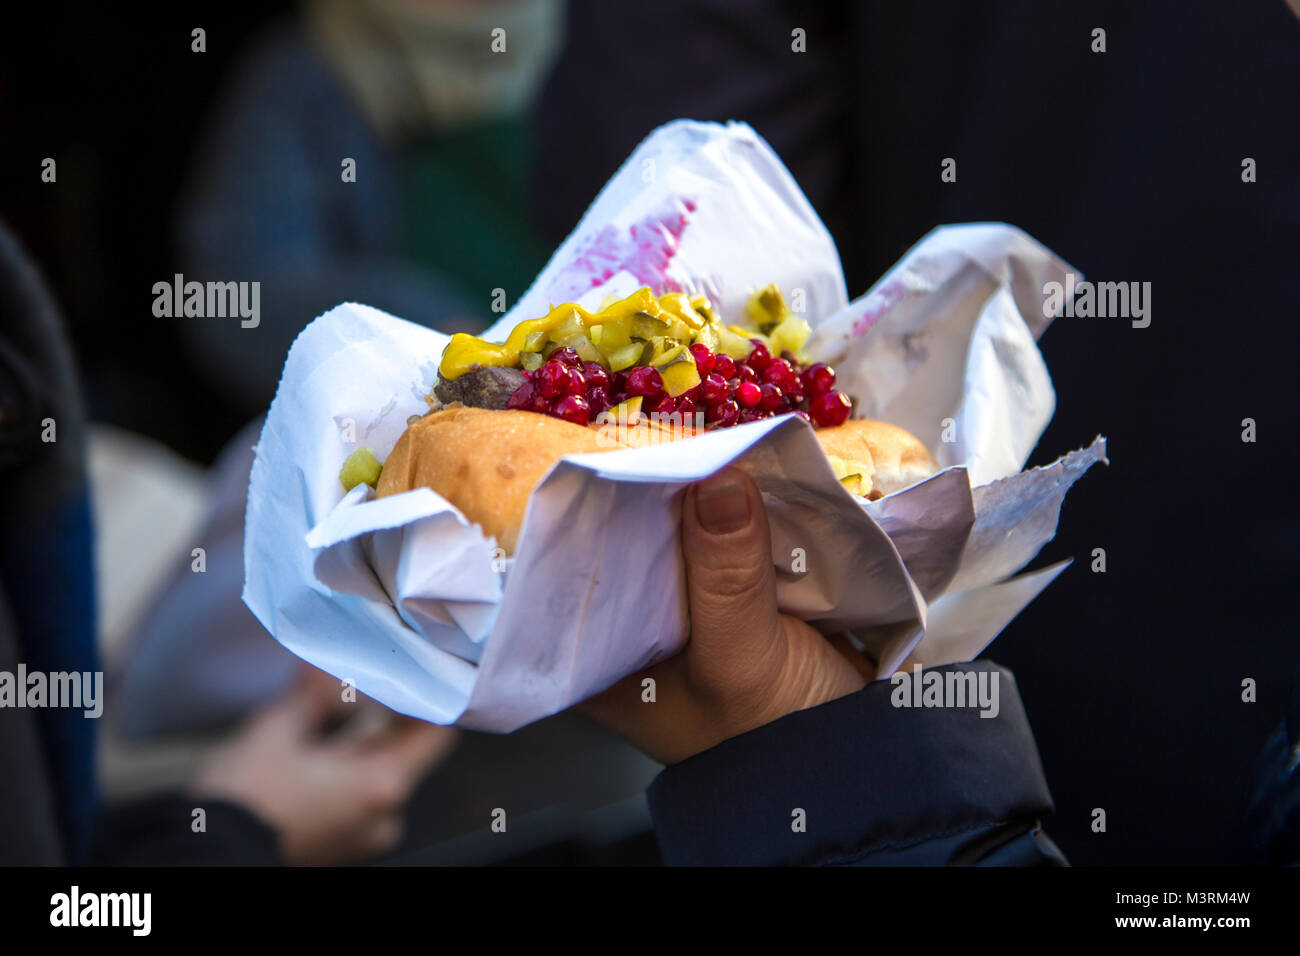 Hand holding a hot dog with toppings (lingonberry and pickle) at the Scandinavian Christmas Market, London, UK Stock Photo